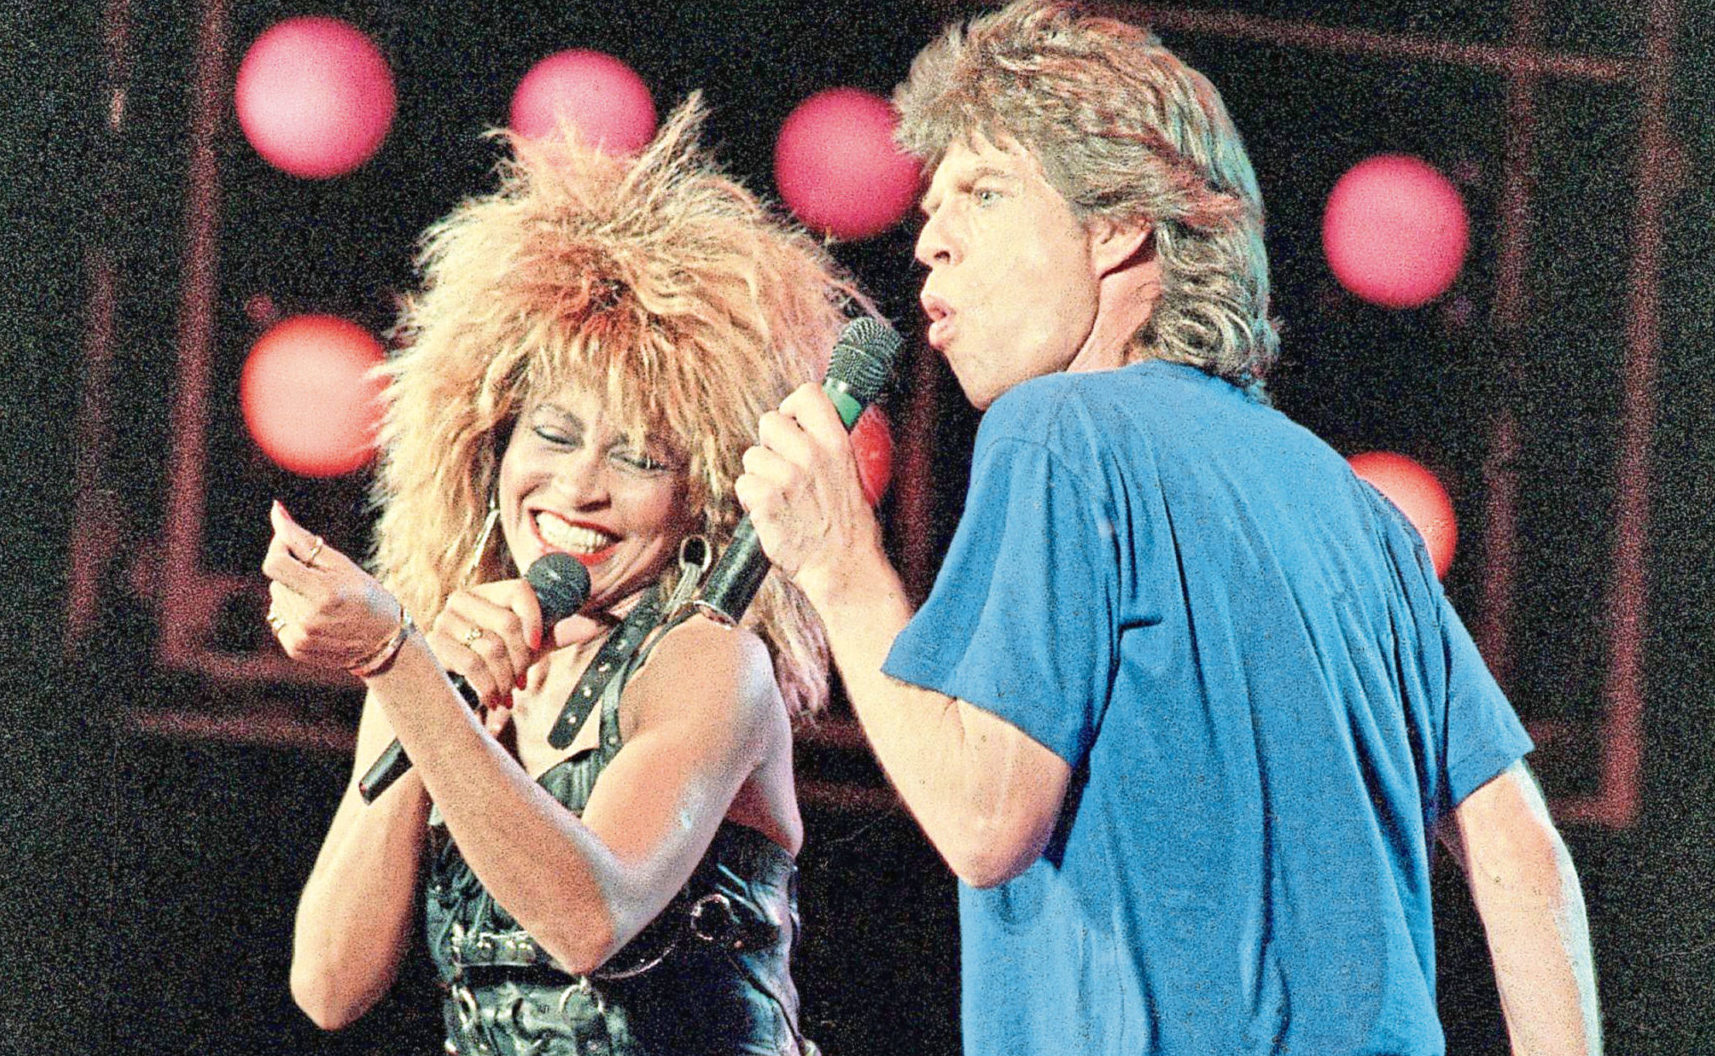 Tina Turner and Mick Jagger perform during Live Aid in Philadelphia July 13, 1985